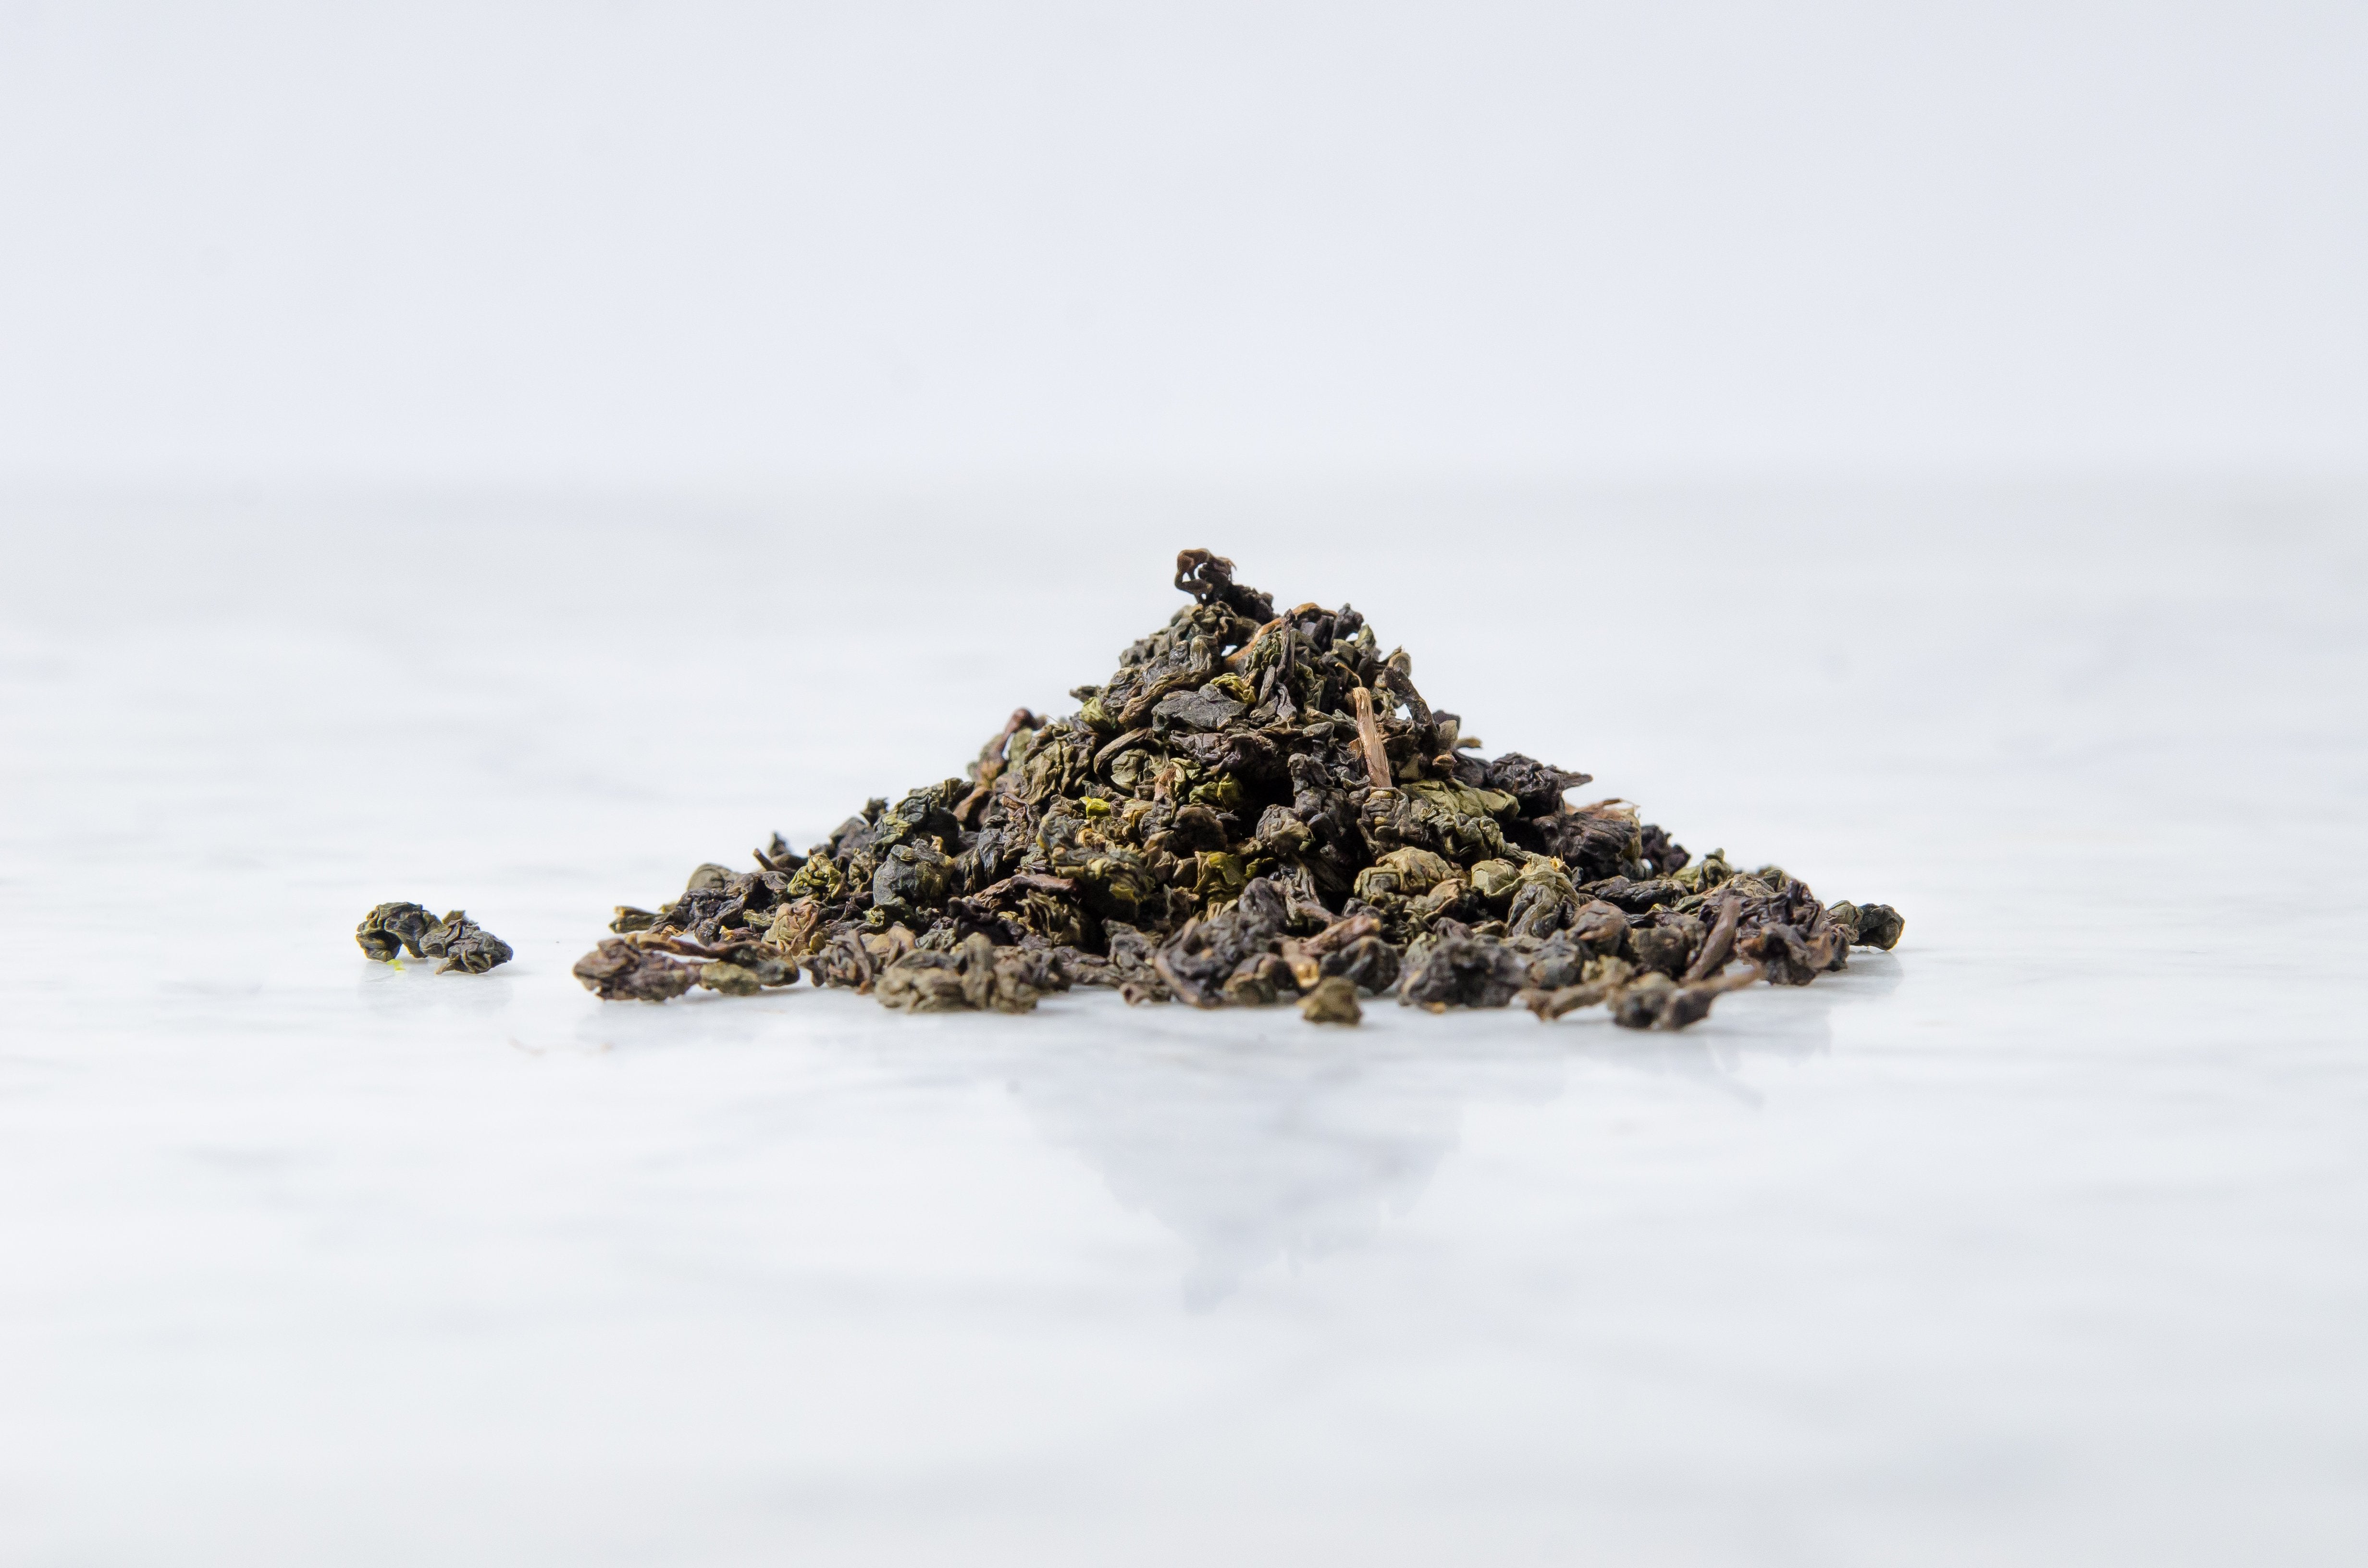 Complete Guide to Brewing Loose Leaf Oolong Tea (UPDATED) - Eco